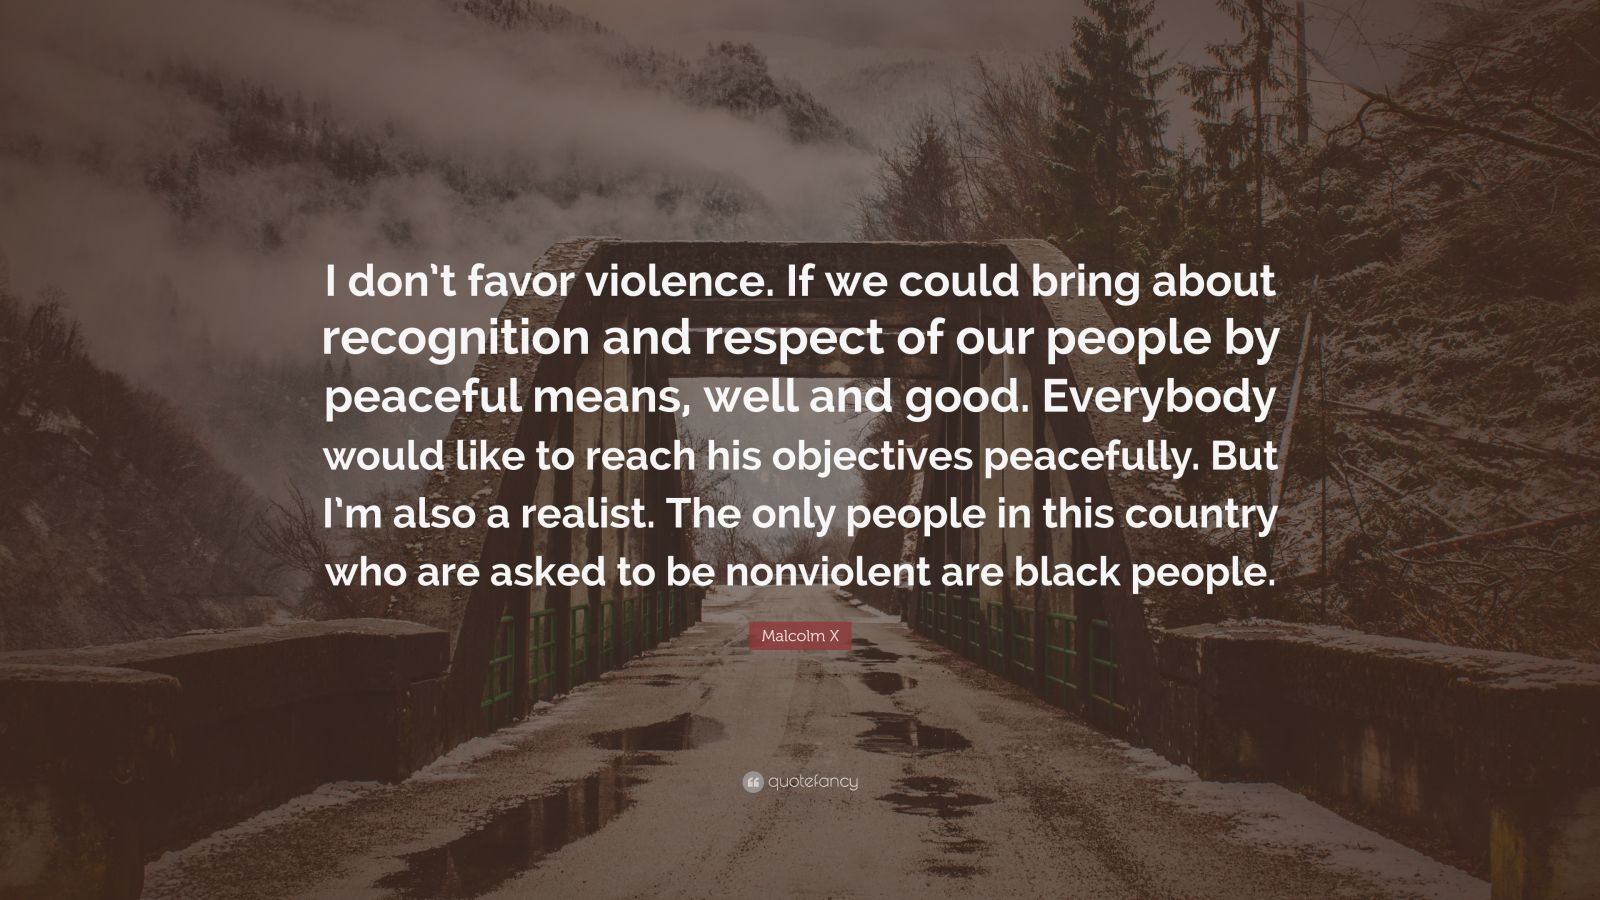 Malcolm X Quote: "I don't favor violence. If we could bring about recognition and respect of our ...